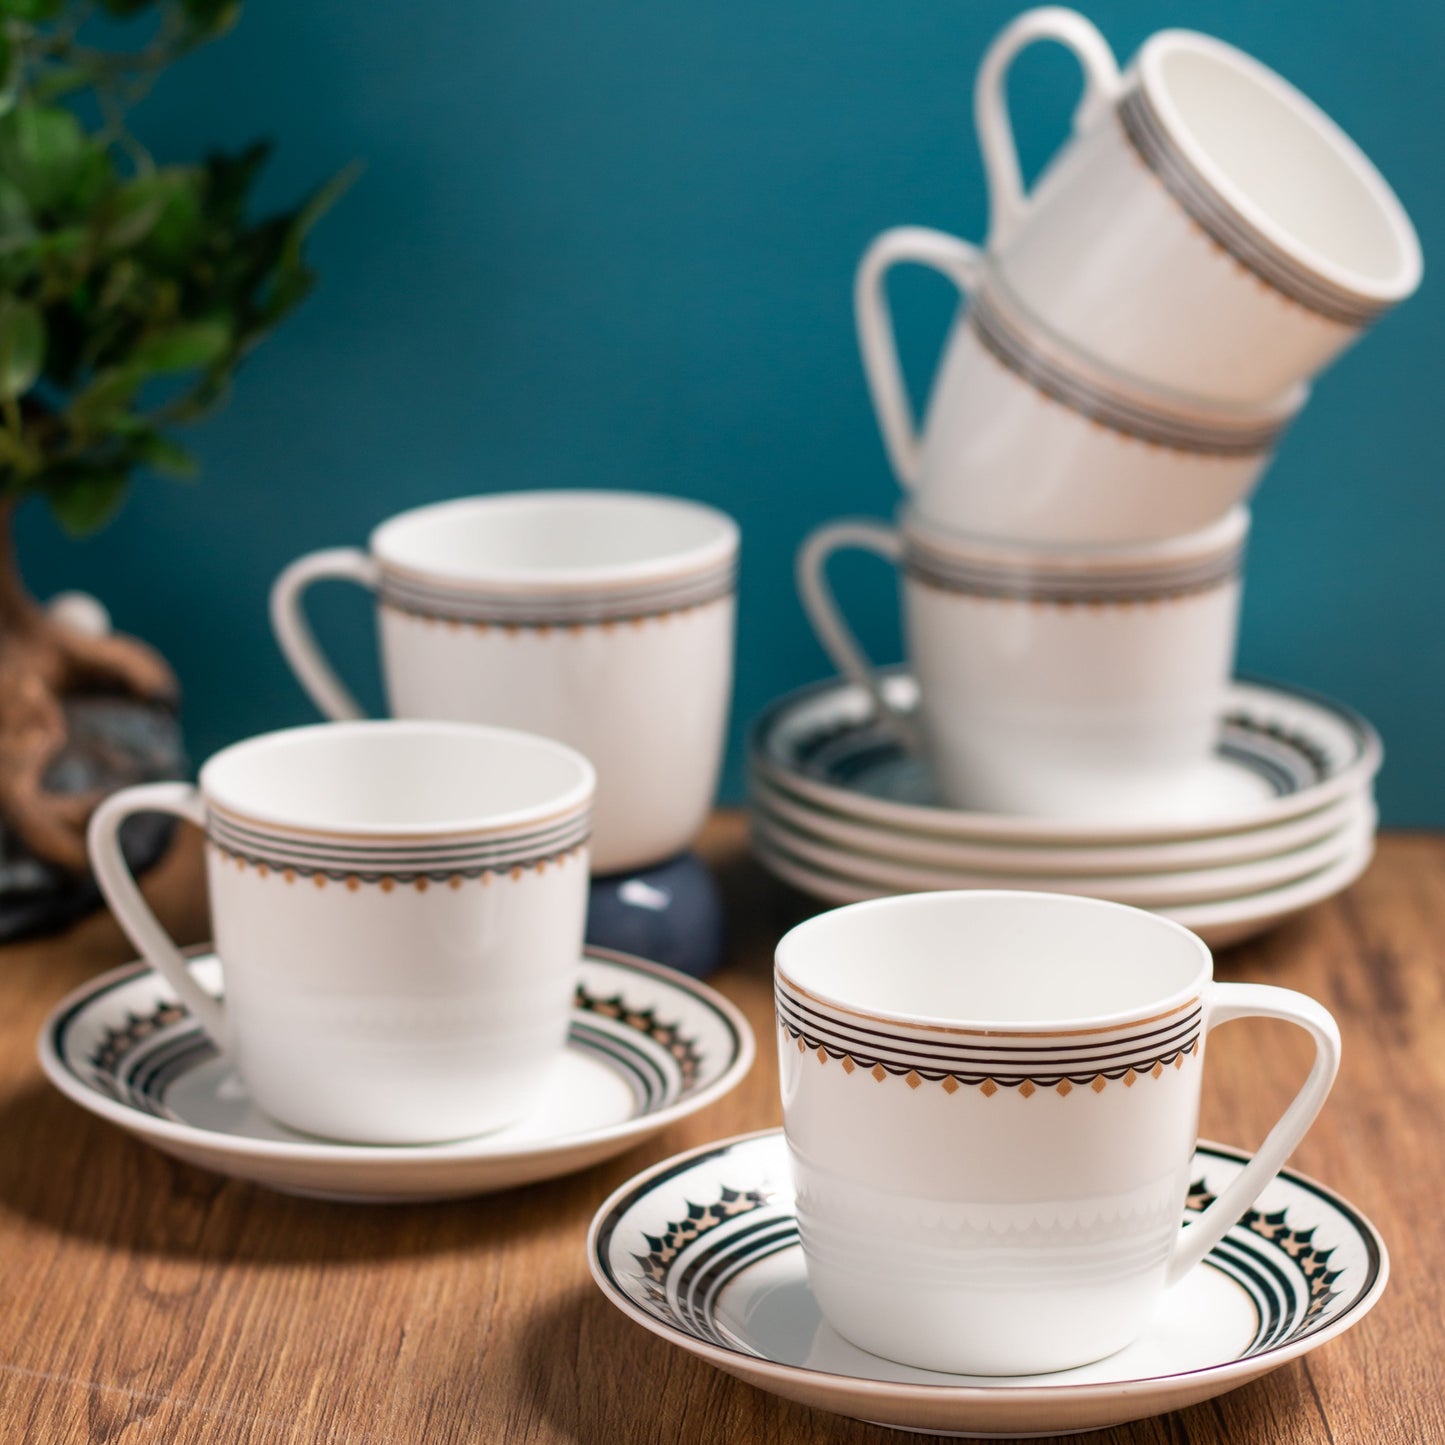 Cheers Super Cup & Saucer, 170 ml, Set of 12 (6 Cups + 6 Saucers) (S382)